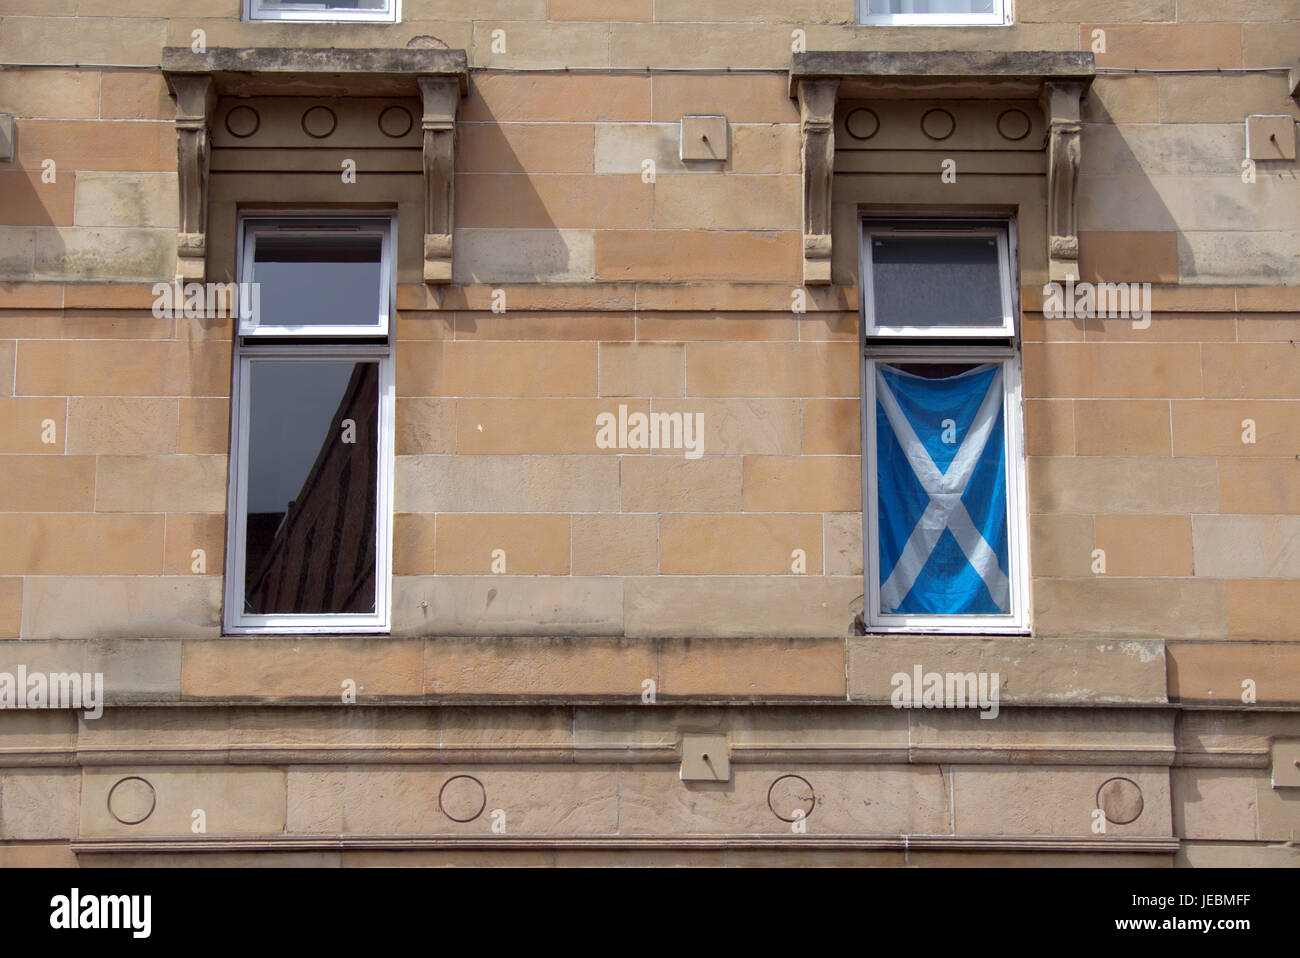 Scottish tenement windows with reflection of sandstone building and satire flag in the window Stock Photo